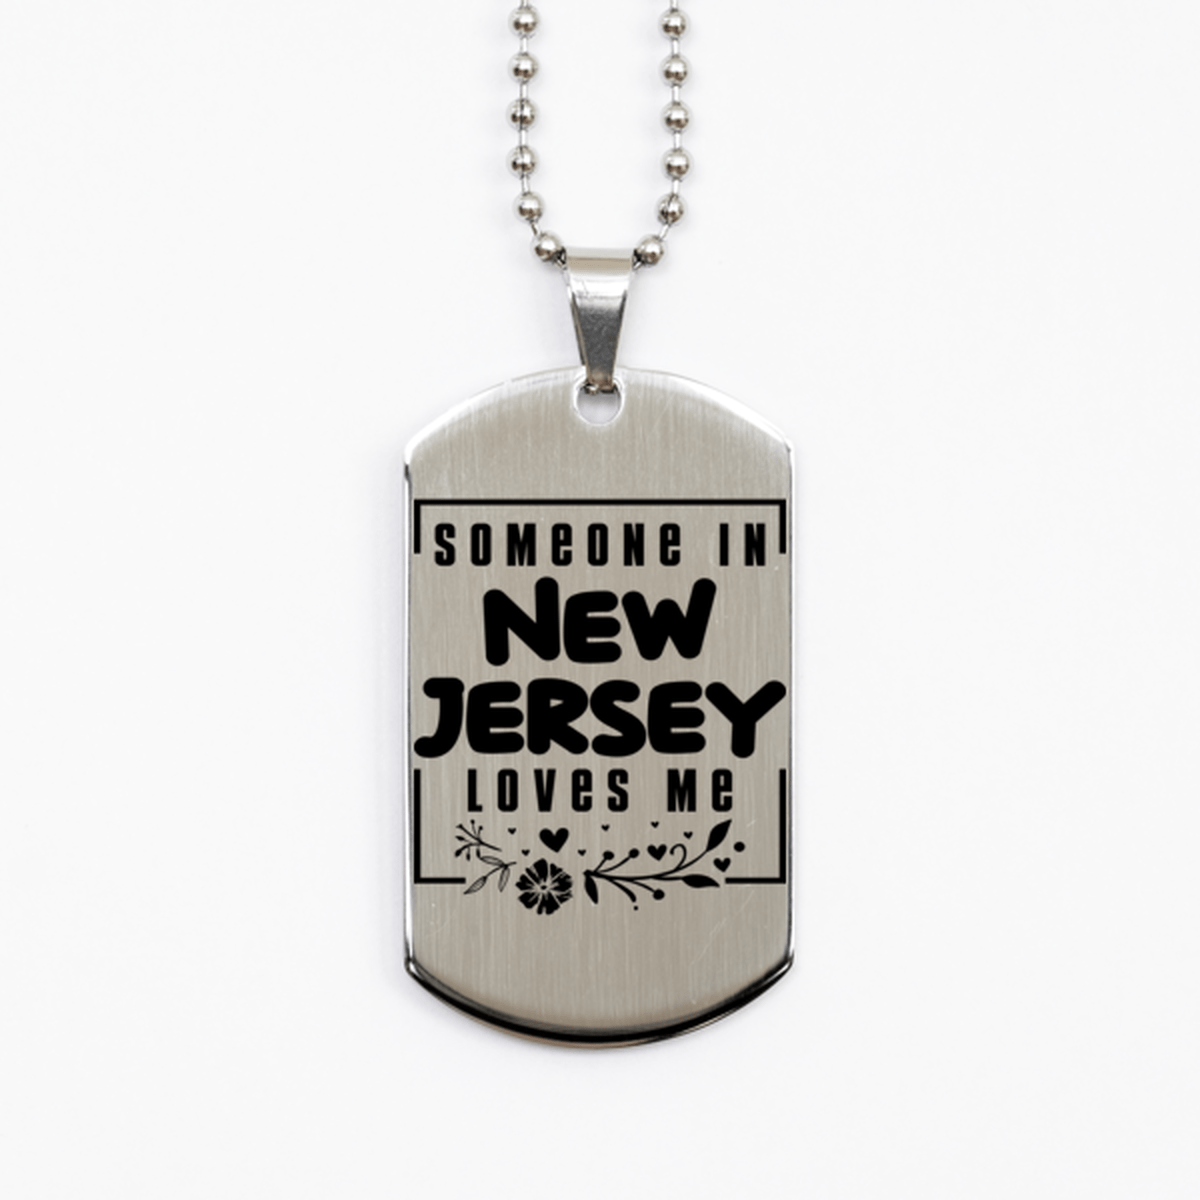 Cute New Jersey Silver Dog Tag Necklace, Someone in New Jersey Loves Me, Best Birthday Gifts from New Jersey Friends & Family